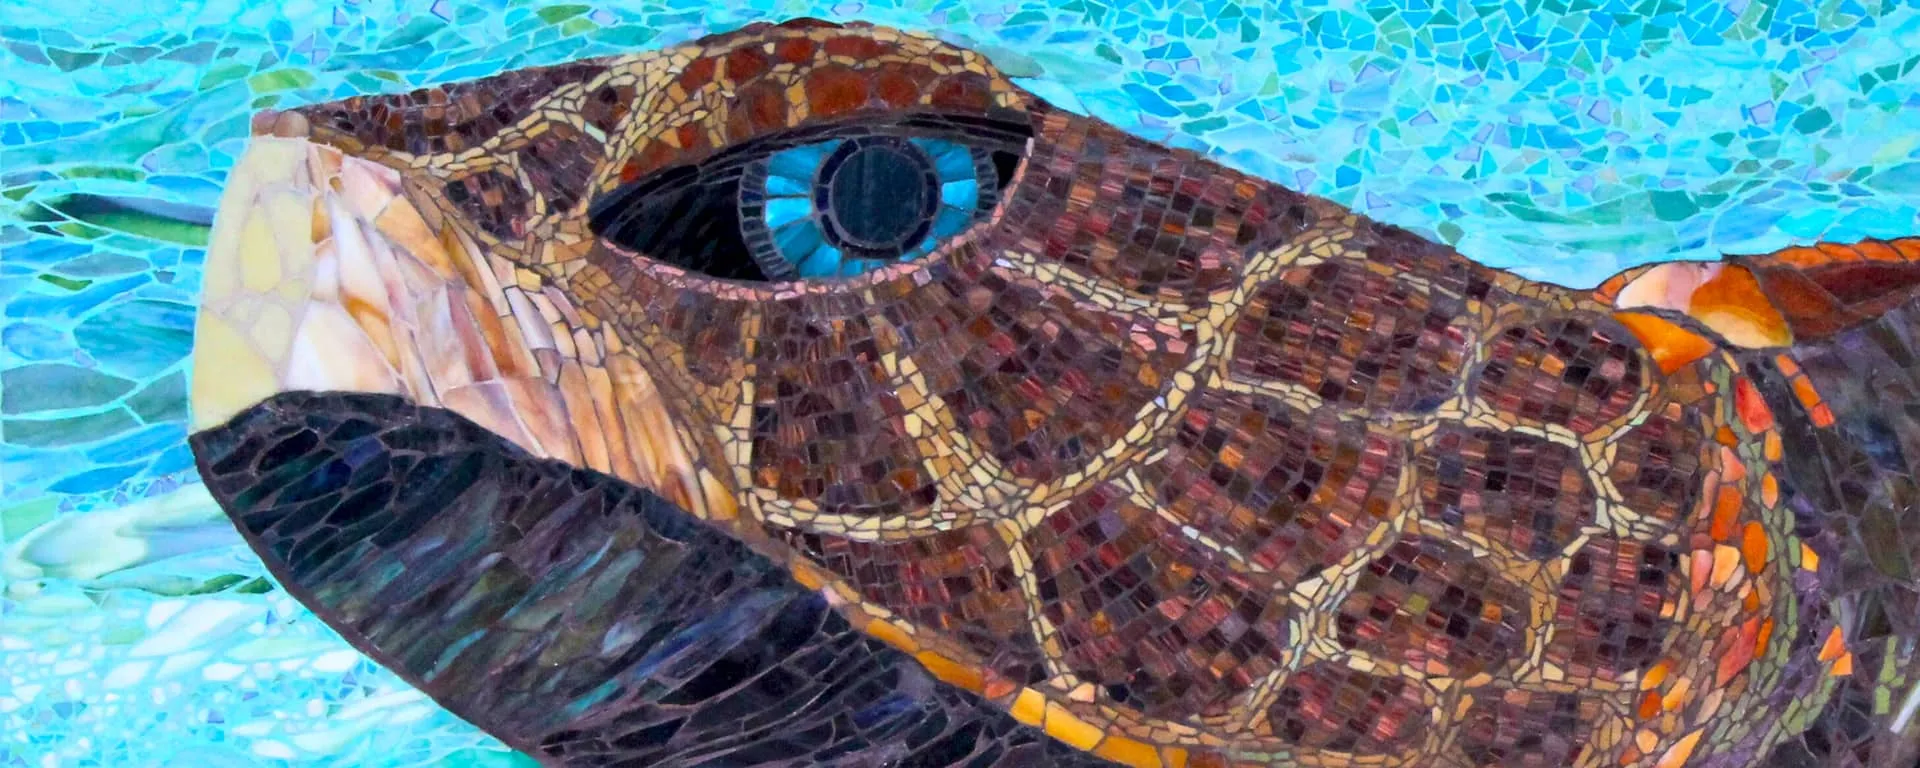 A turtle art piece made of colorful mosaic tiles